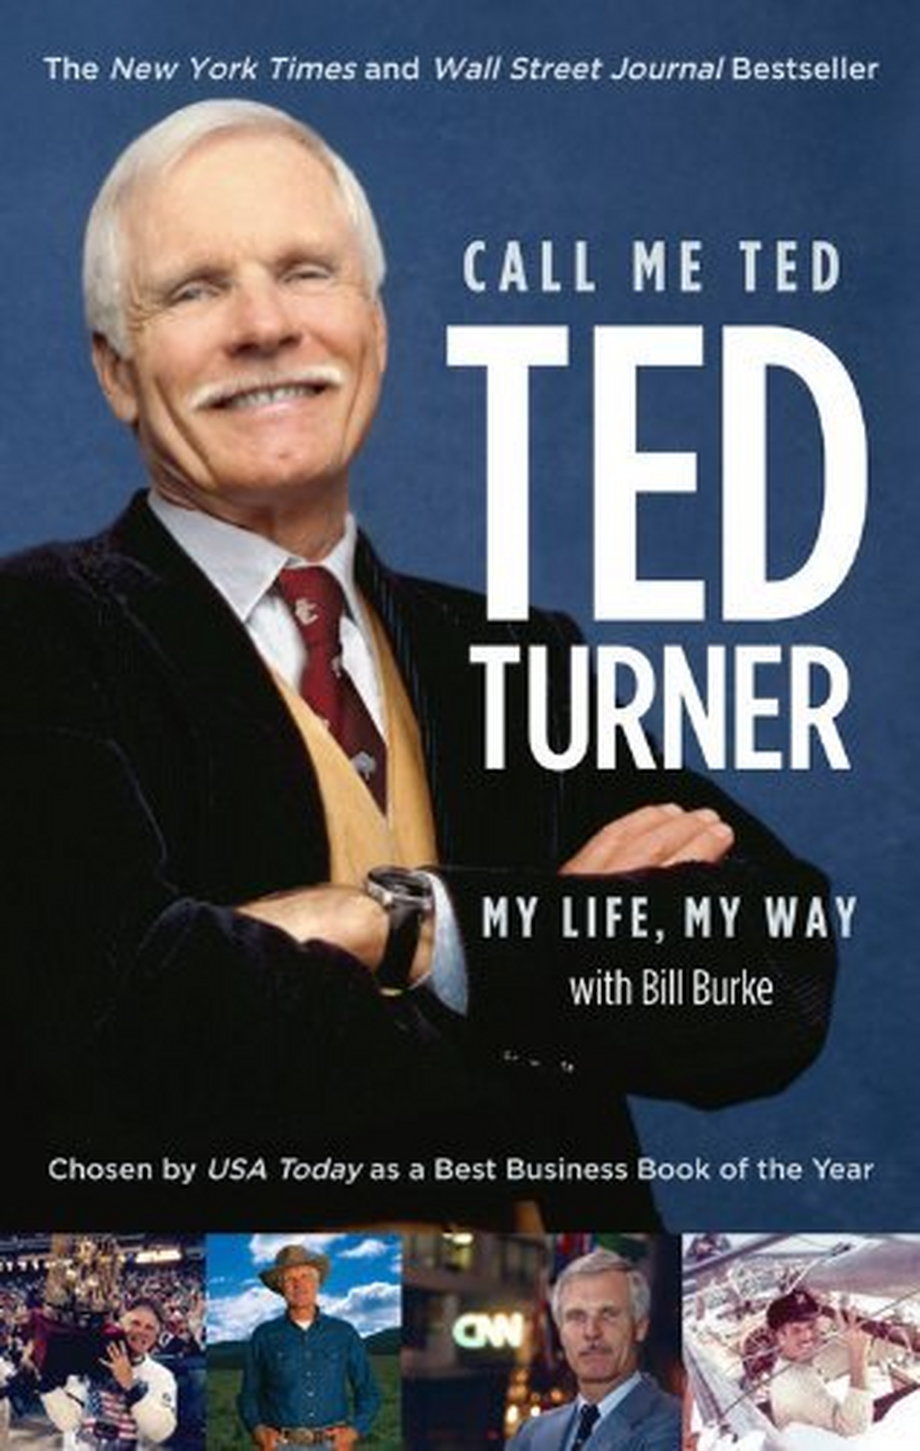 Ted Turner "Call me Ted"